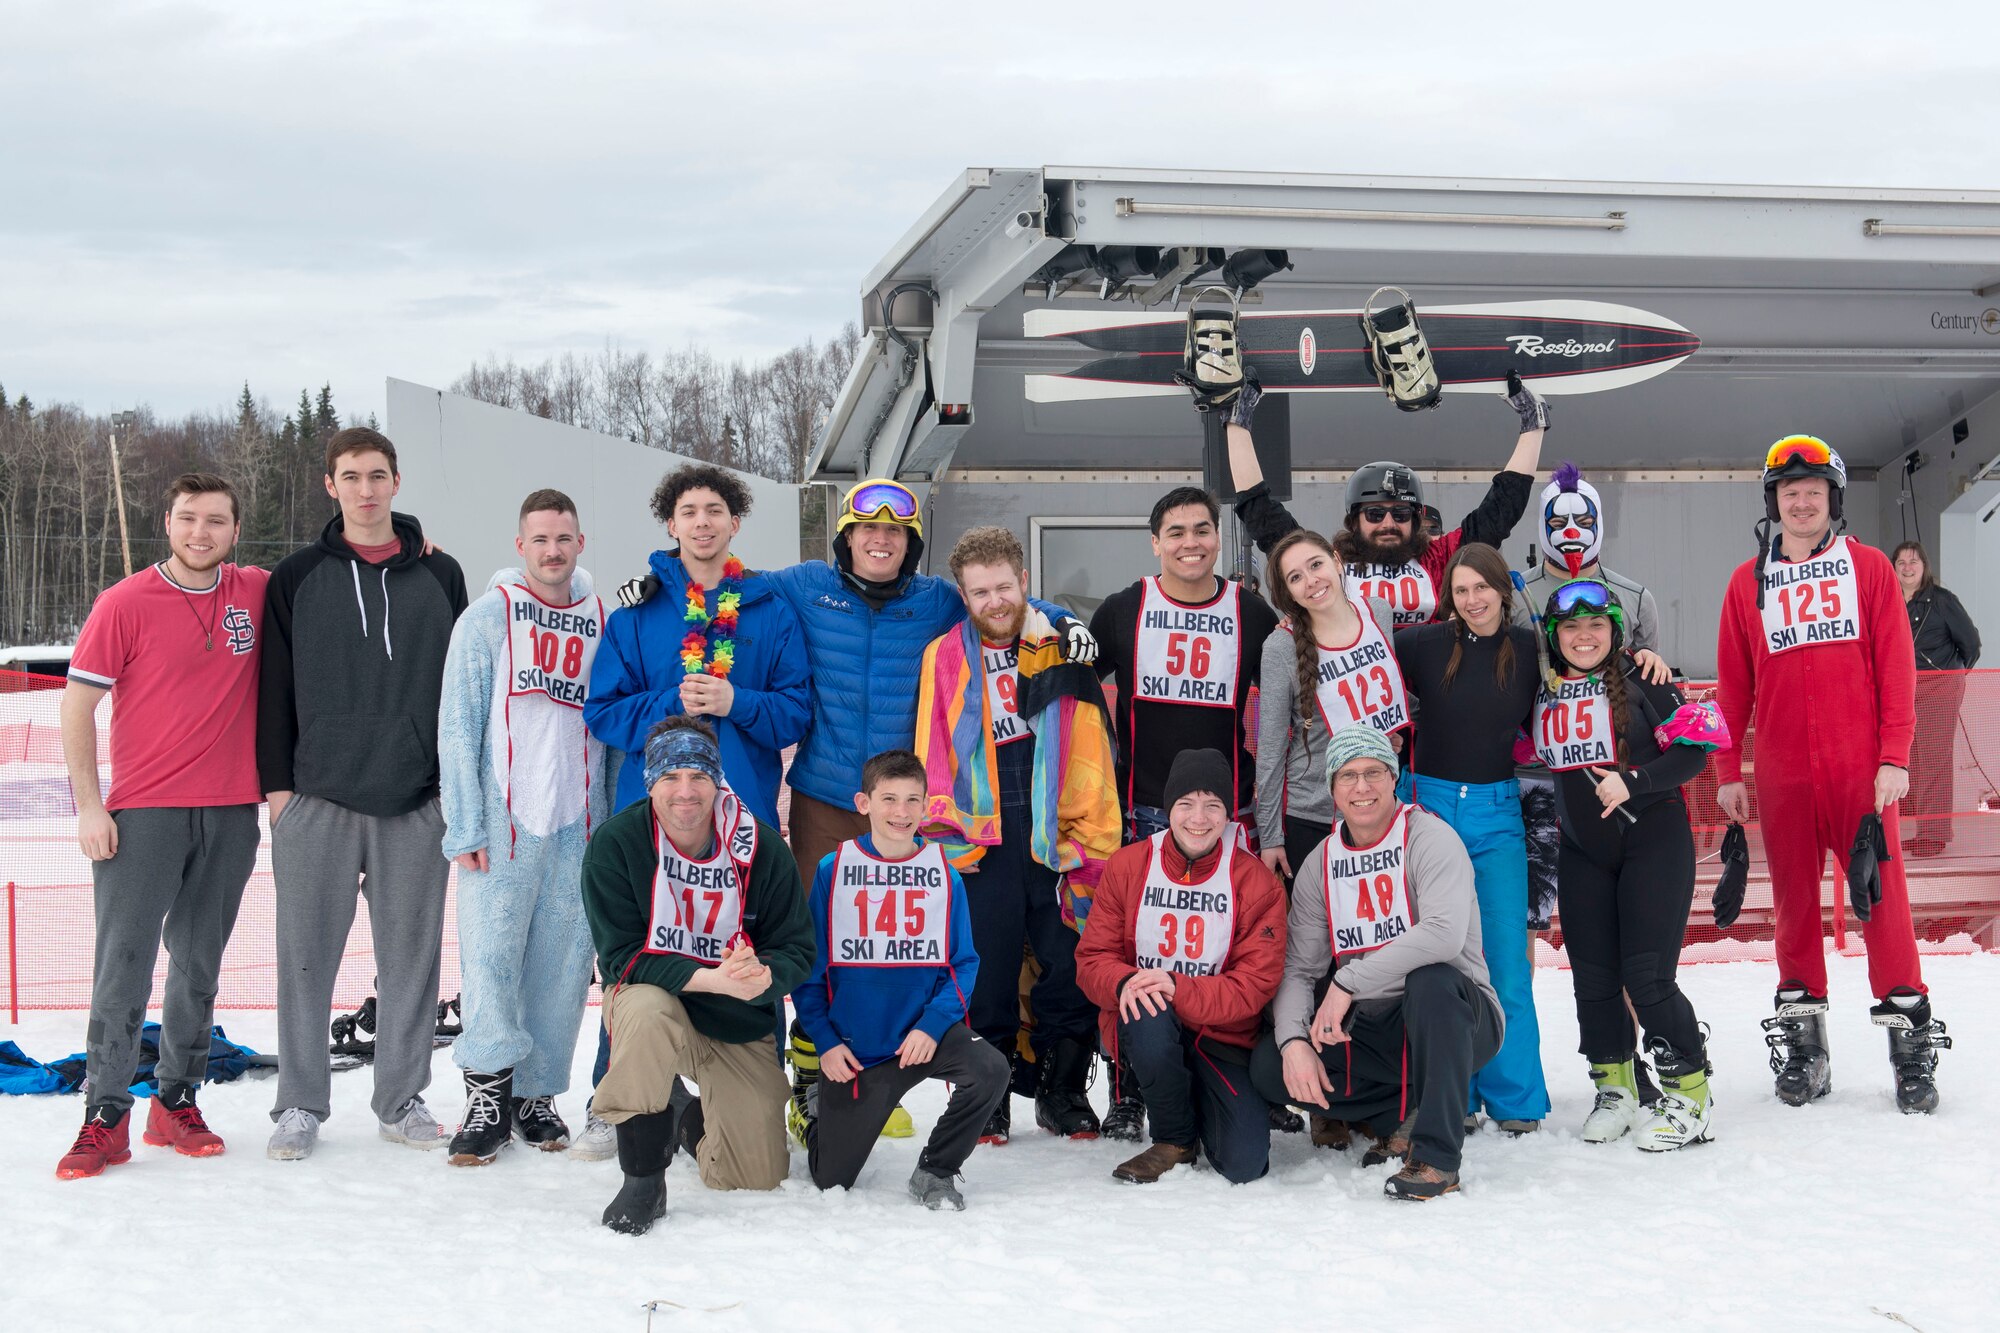 The 2018 Slush Cup participants stand as a group at the Joint Base Elmendorf-Richardson Hillberg Ski Area, March 18, 2018. The Slush Cup is a two-fold annual event celebrating the change in weather, consisting of skiers and snowboarders trying to make it across a man-made slush pond without falling.